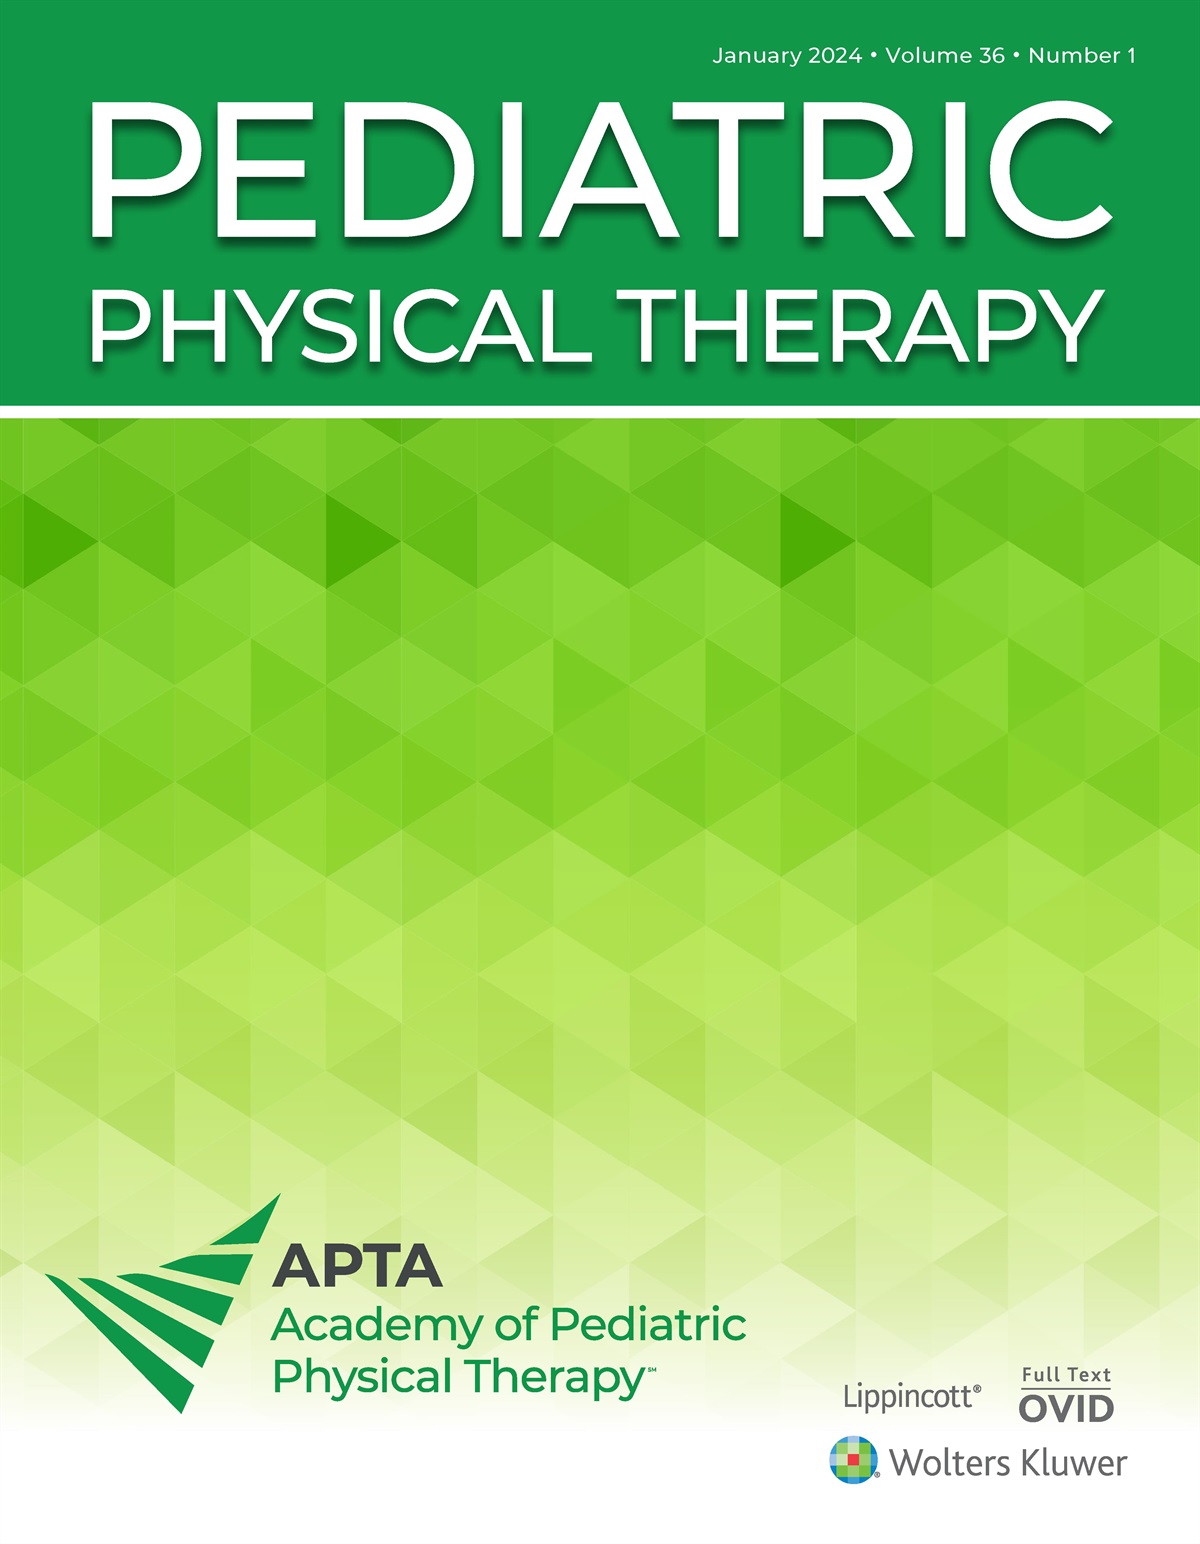 Commentary on “Effect of Early Physical Therapy on Children of School Age With Hematological Cancer: A Quasi-Randomized Controlled Pilot Study”